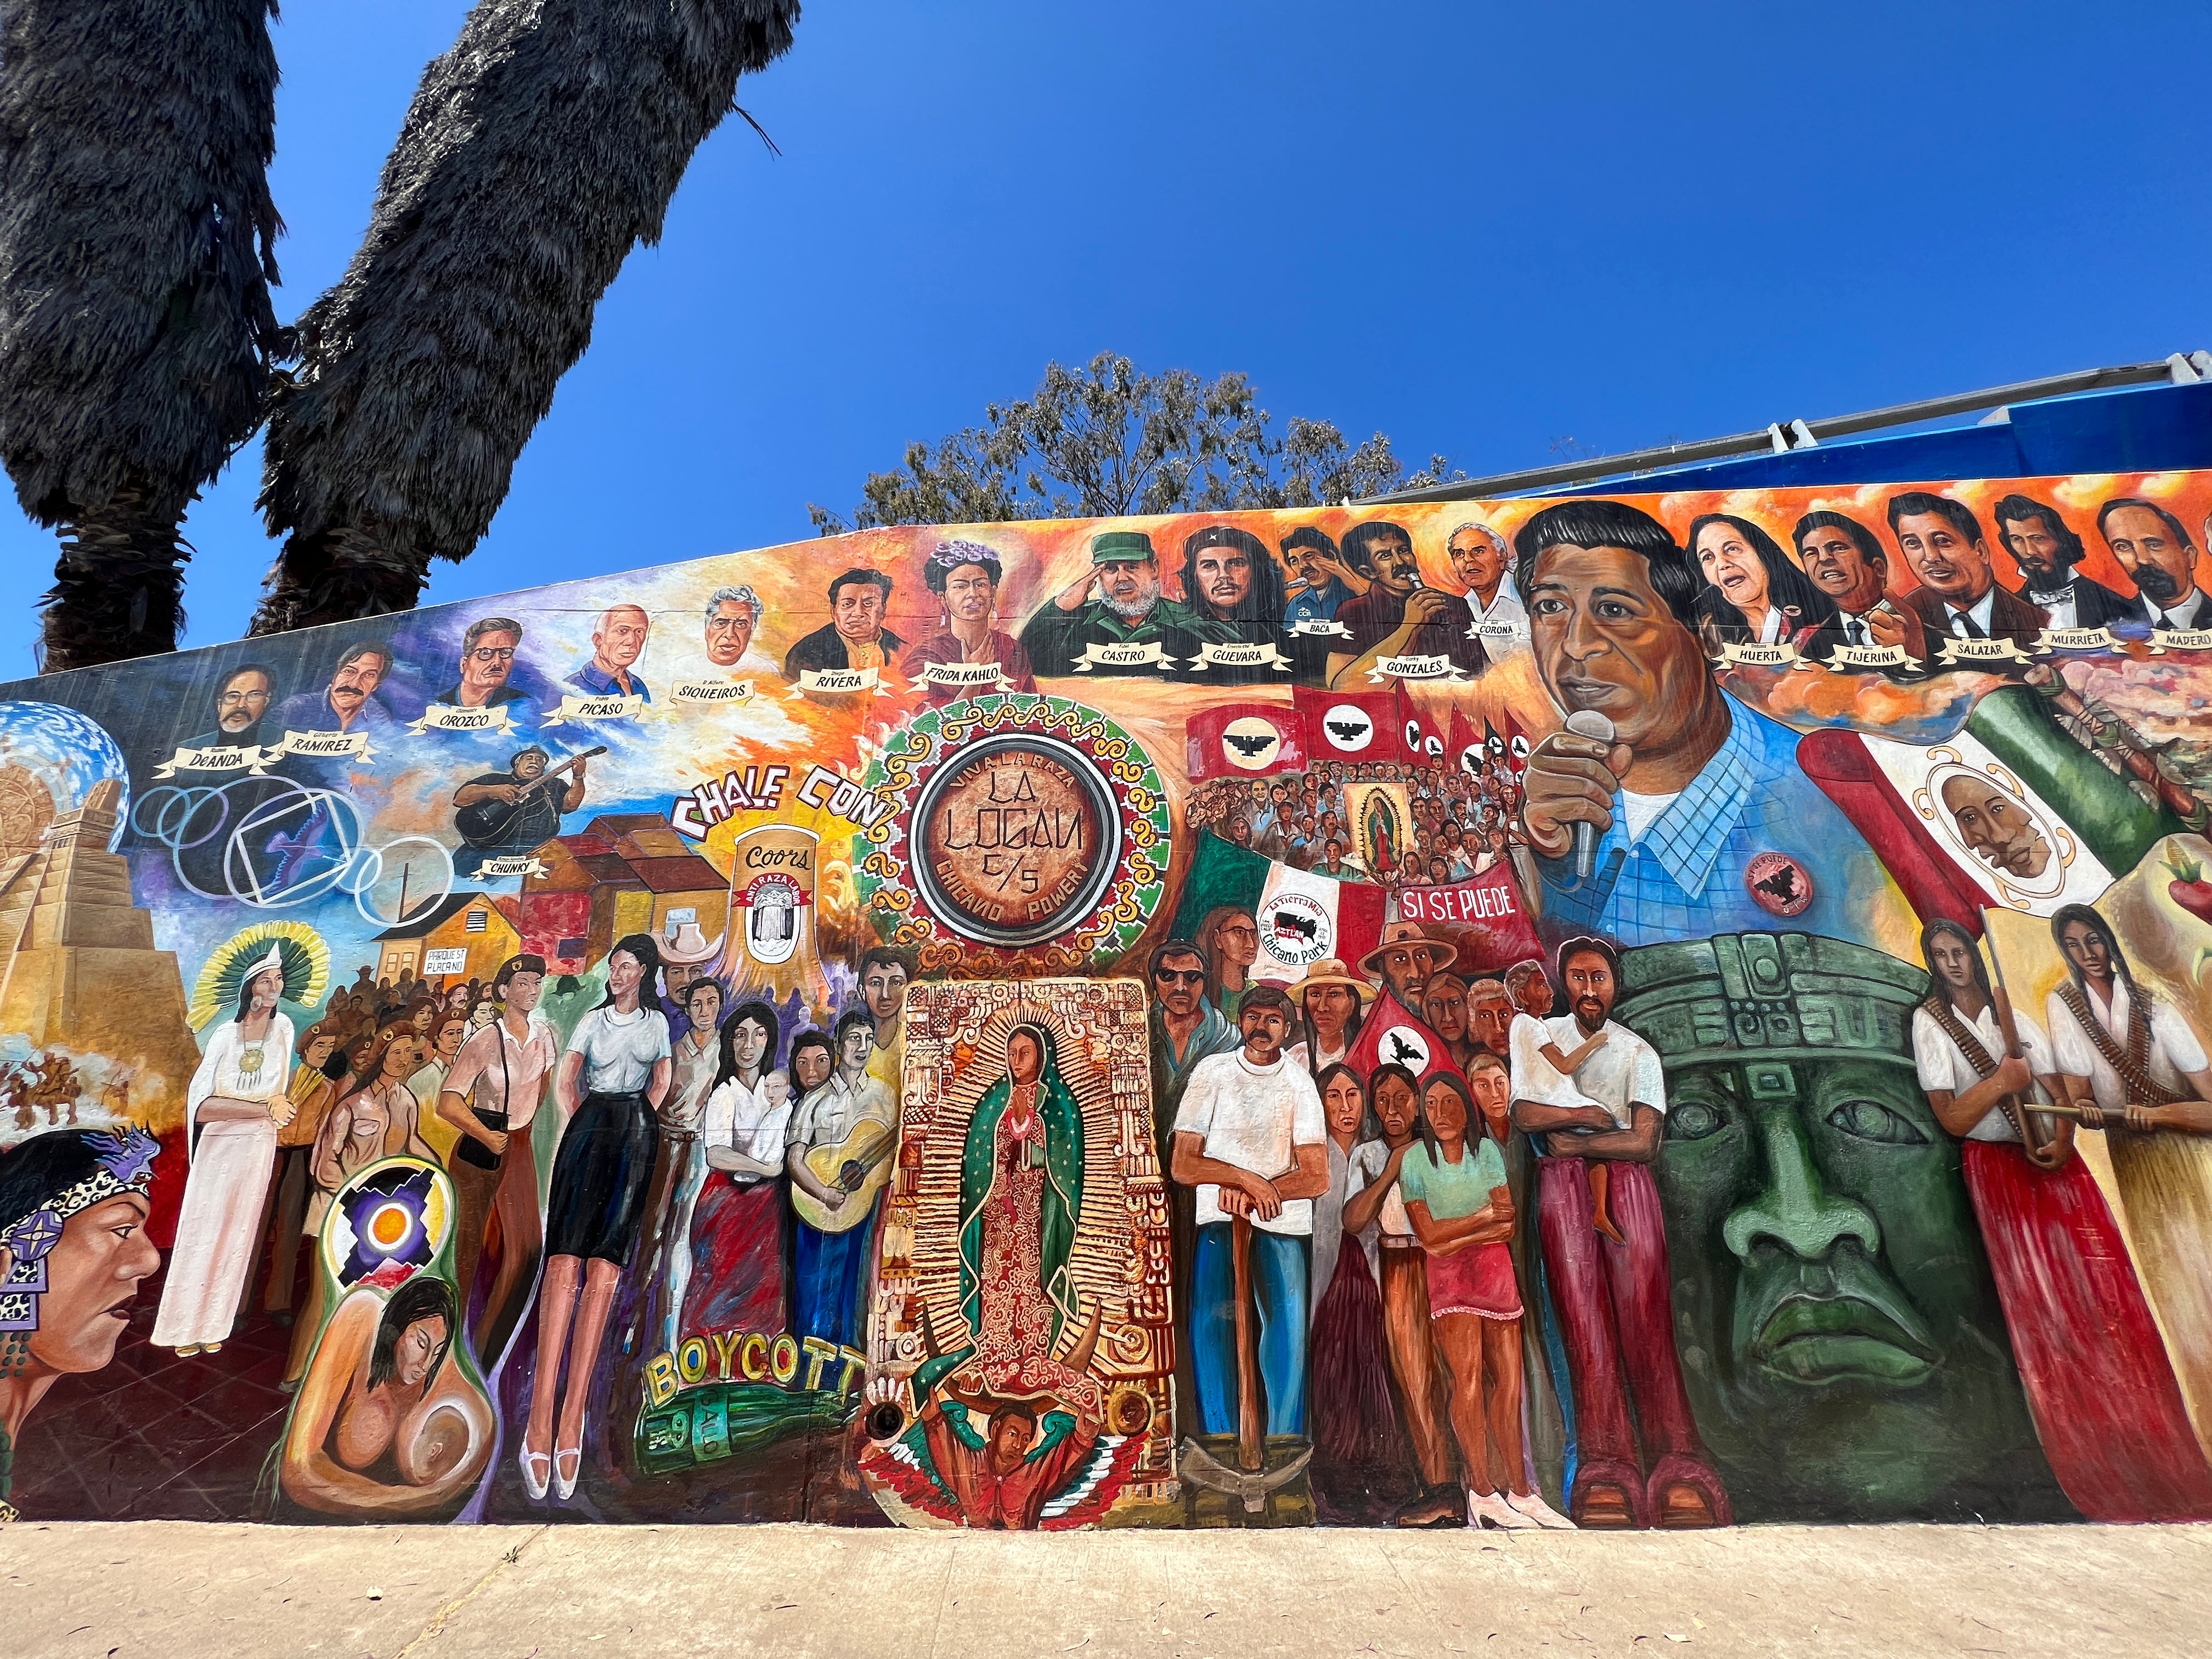 Chicano Park in San Diego is filled with murals about Hispanic and Chicano struggles for equality